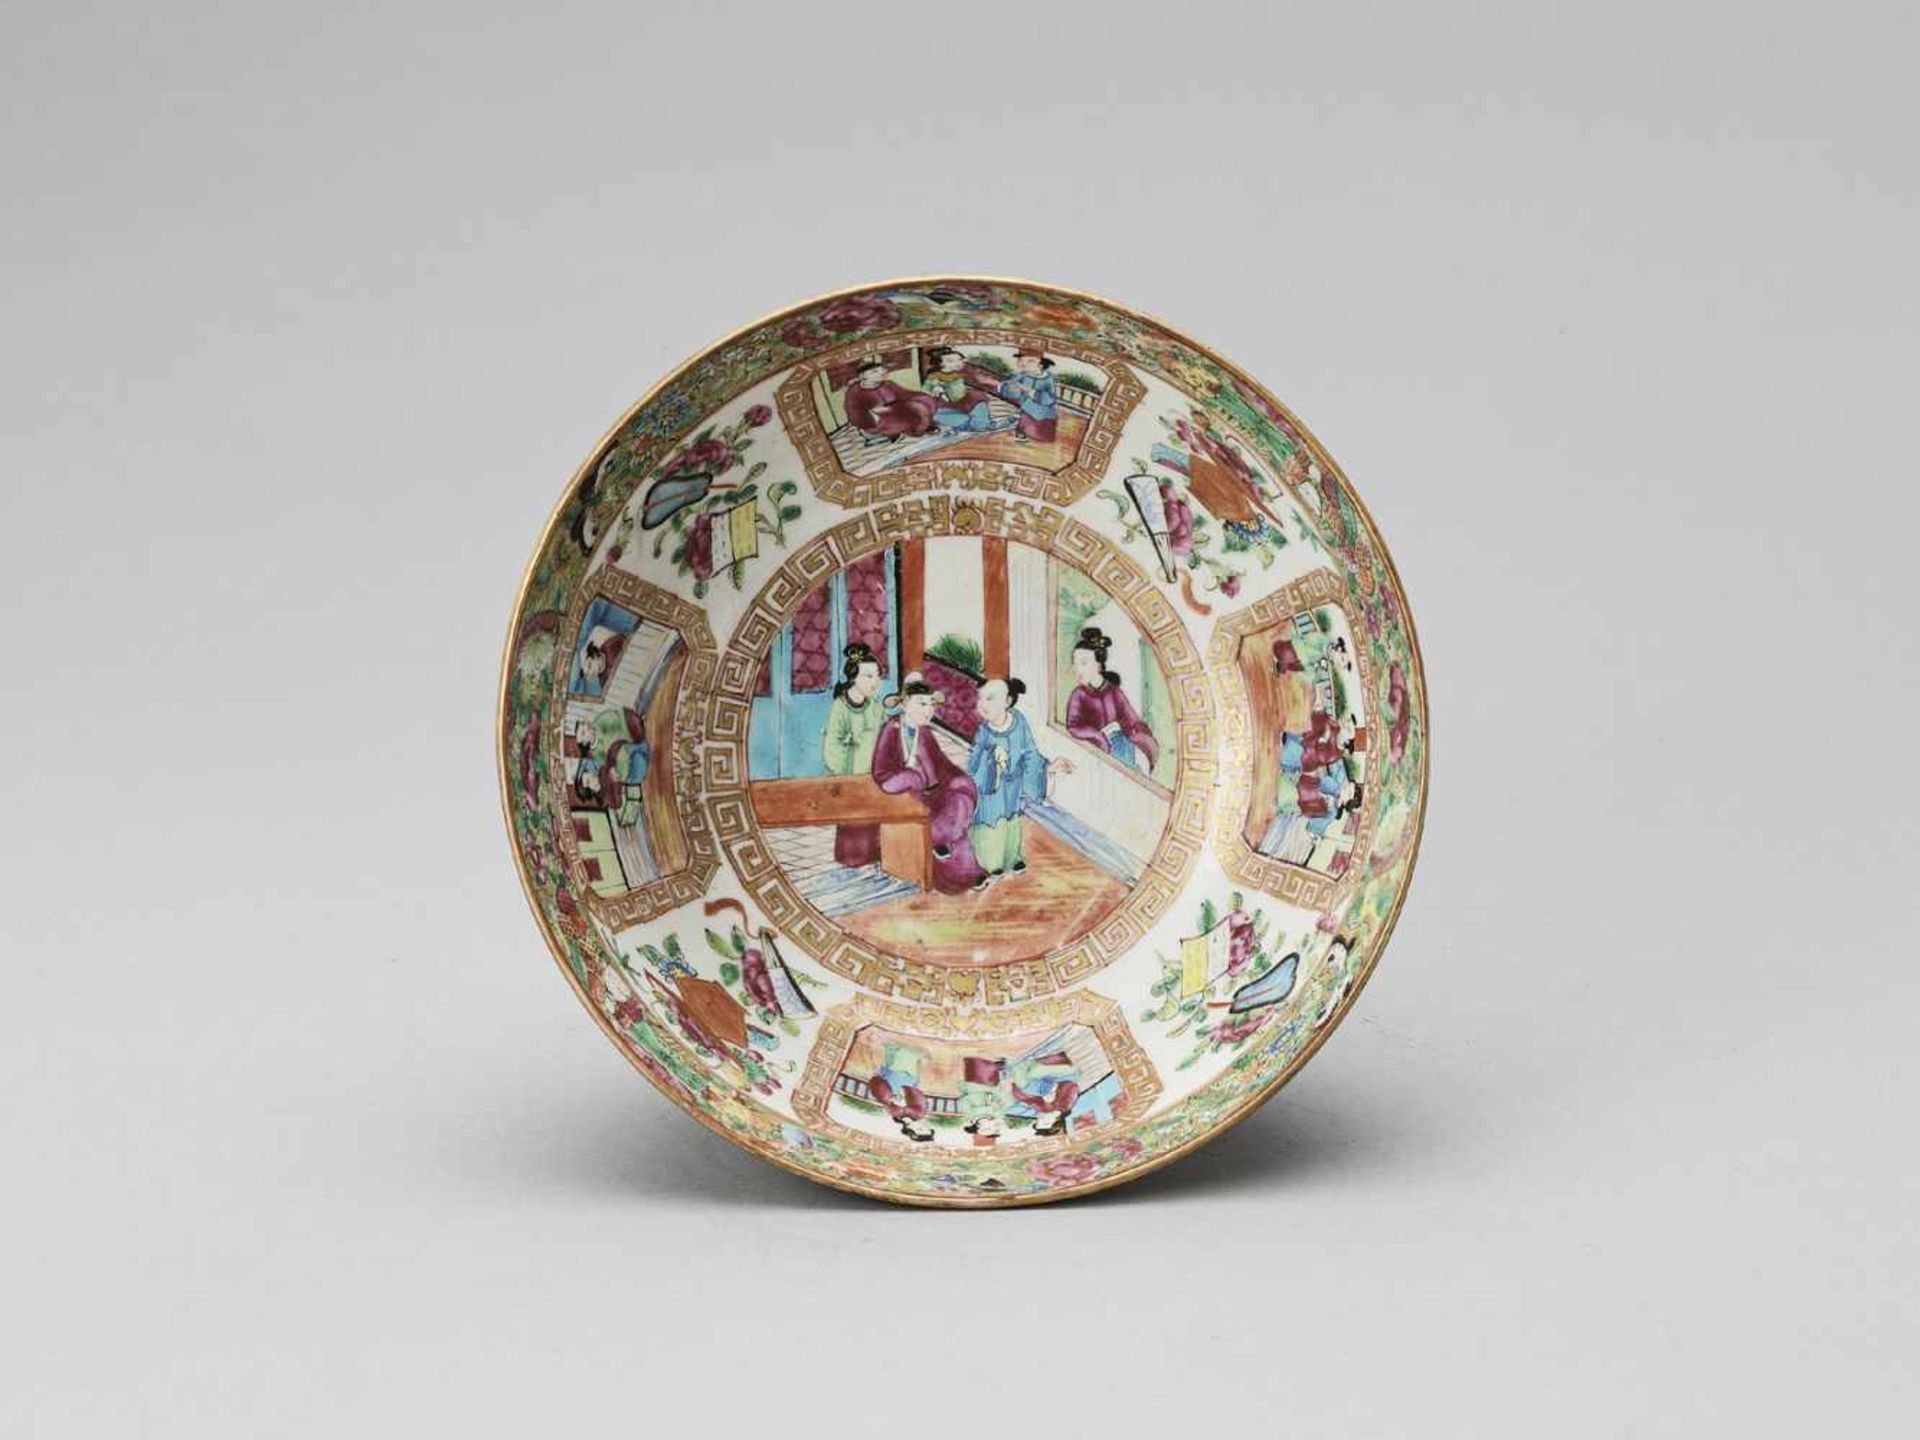 A CANTON SCHOOL FAMILLE ROSE GILT BOWL, LATE QING